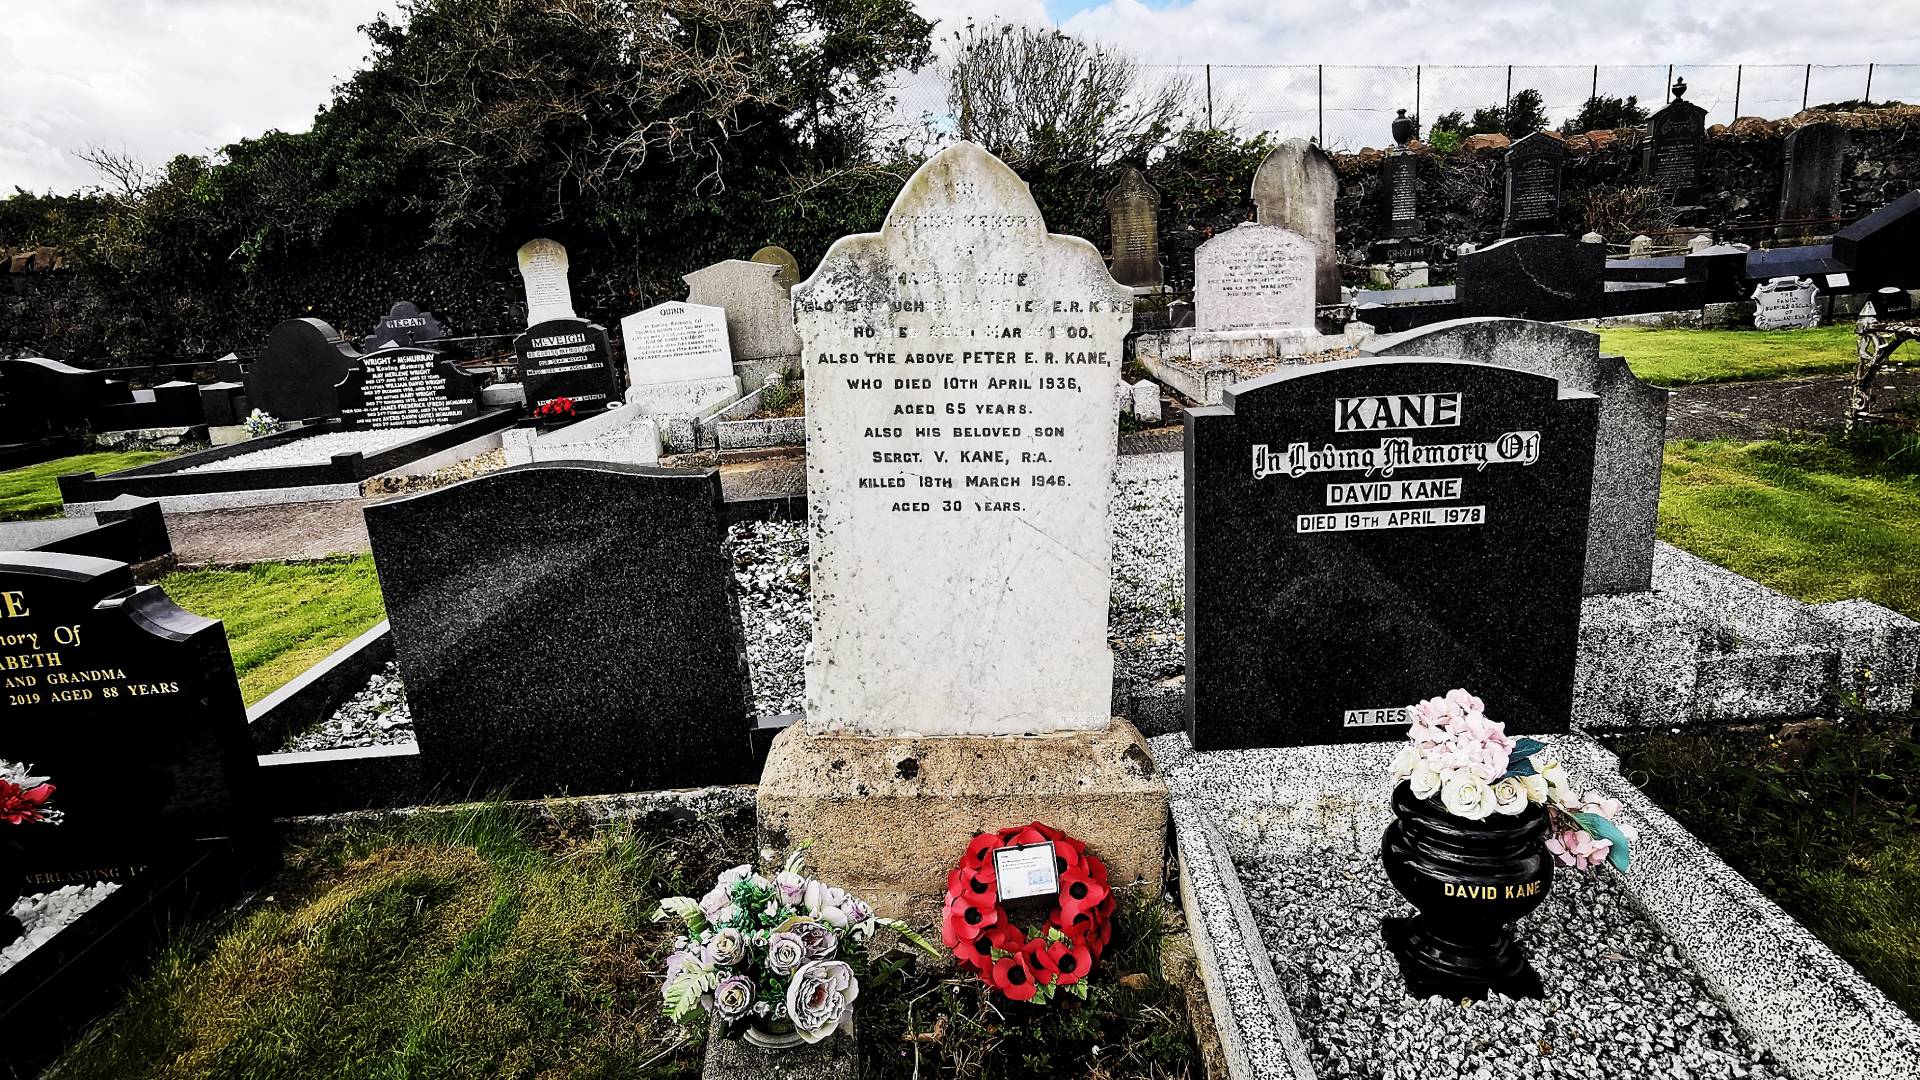 A family memorial commemorates Sergeant Vincent Kane in Seagoe Cemetery, Portadown, Co. Armagh.